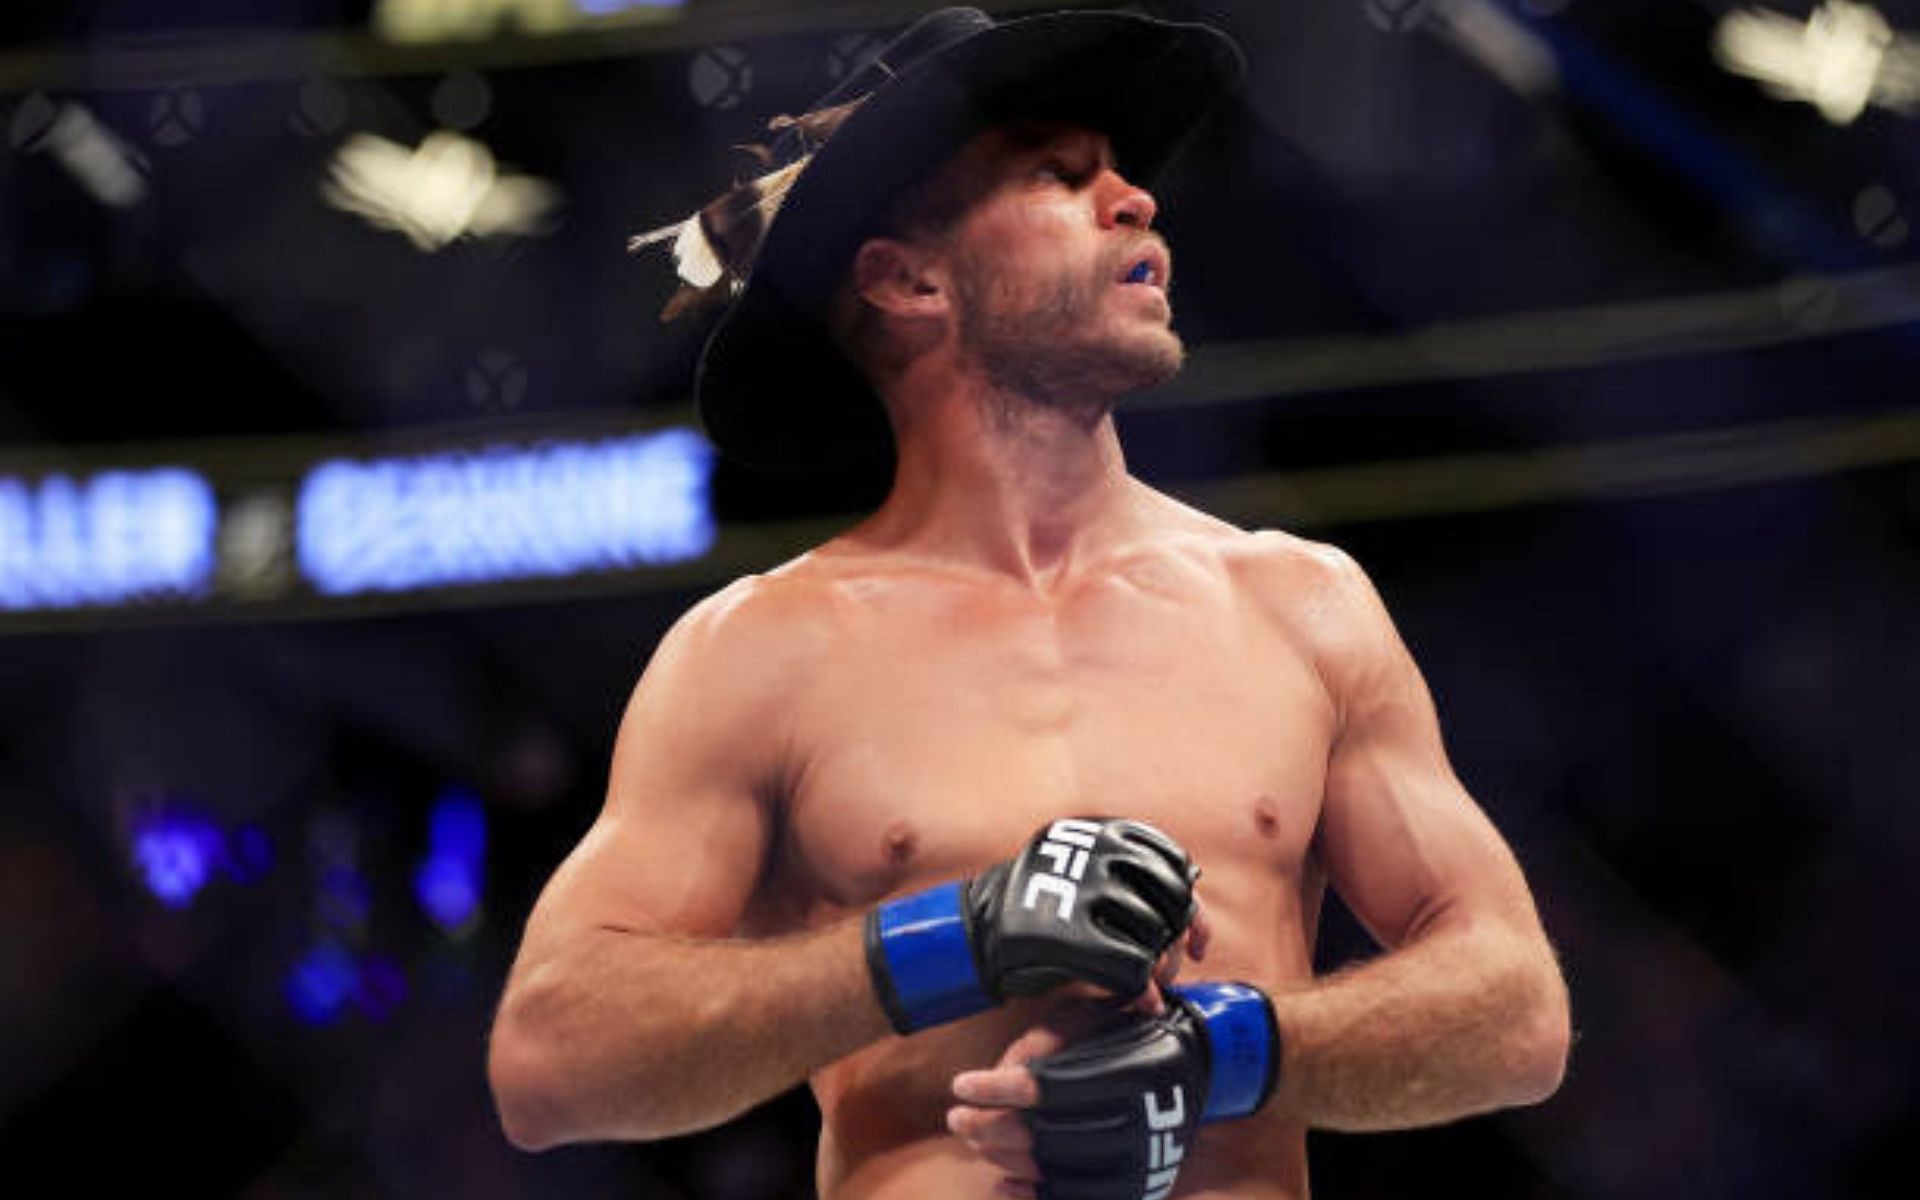 UFC Hall of Fame inductee Donald Cerrone